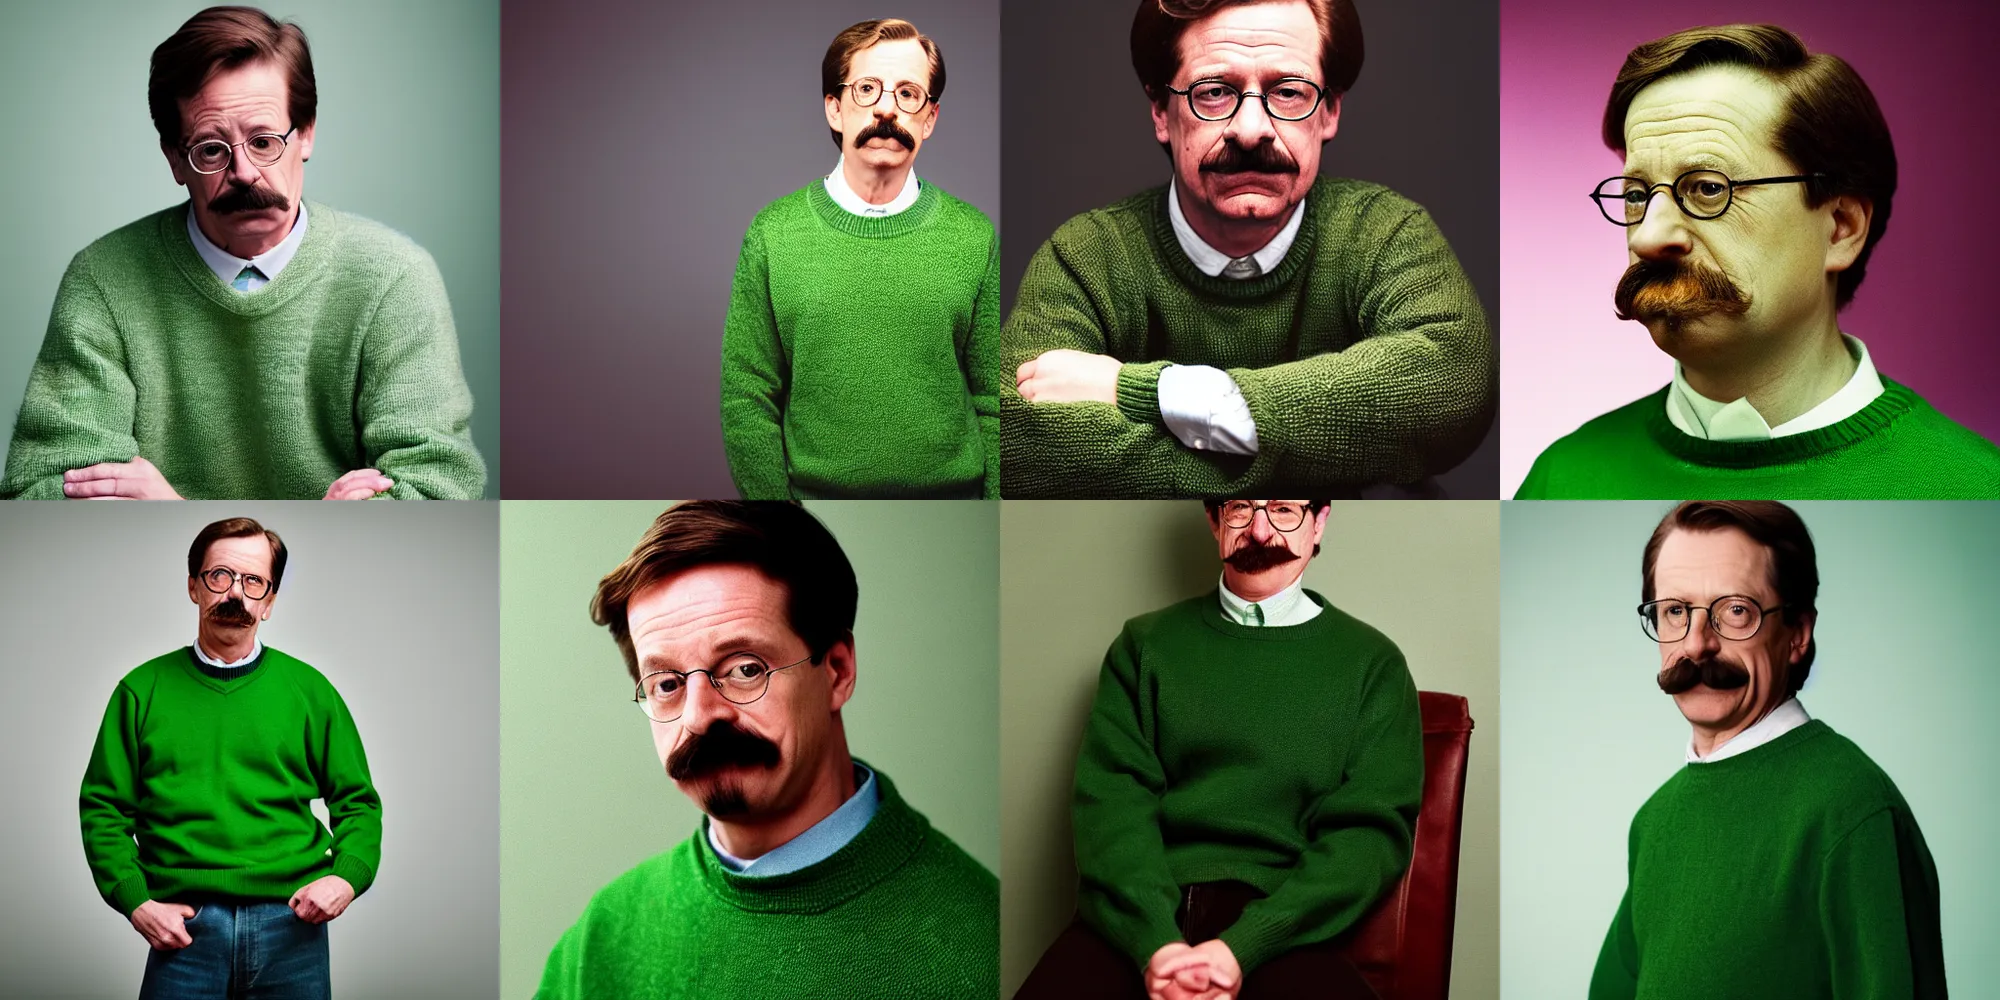 Prompt: Candid portrait photograph of Ned Flanders wearing a green jumper, taken by Annie Leibovitz, studio lighting, ultra realistic